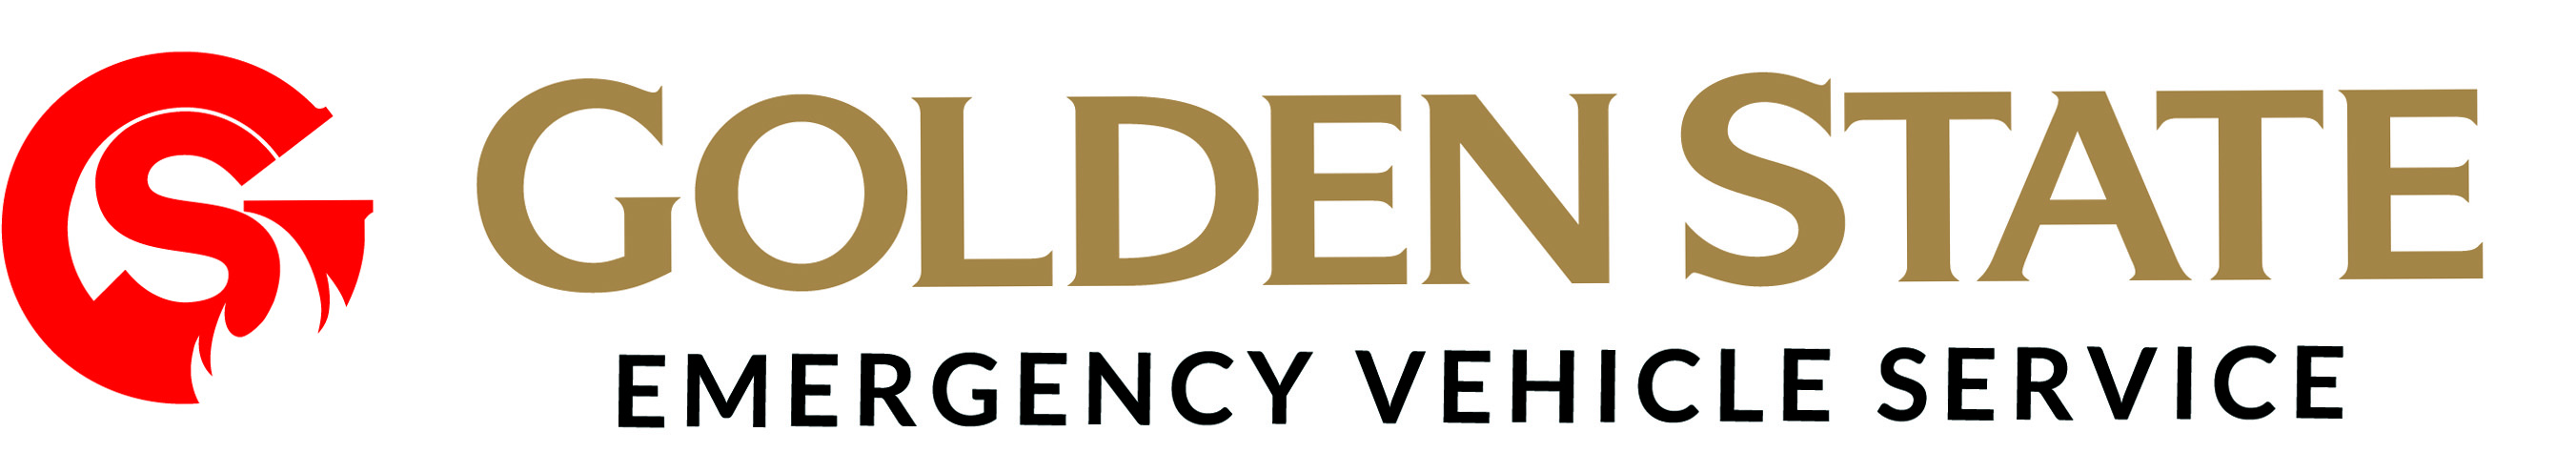 Golden State Emergency Vehicle Service